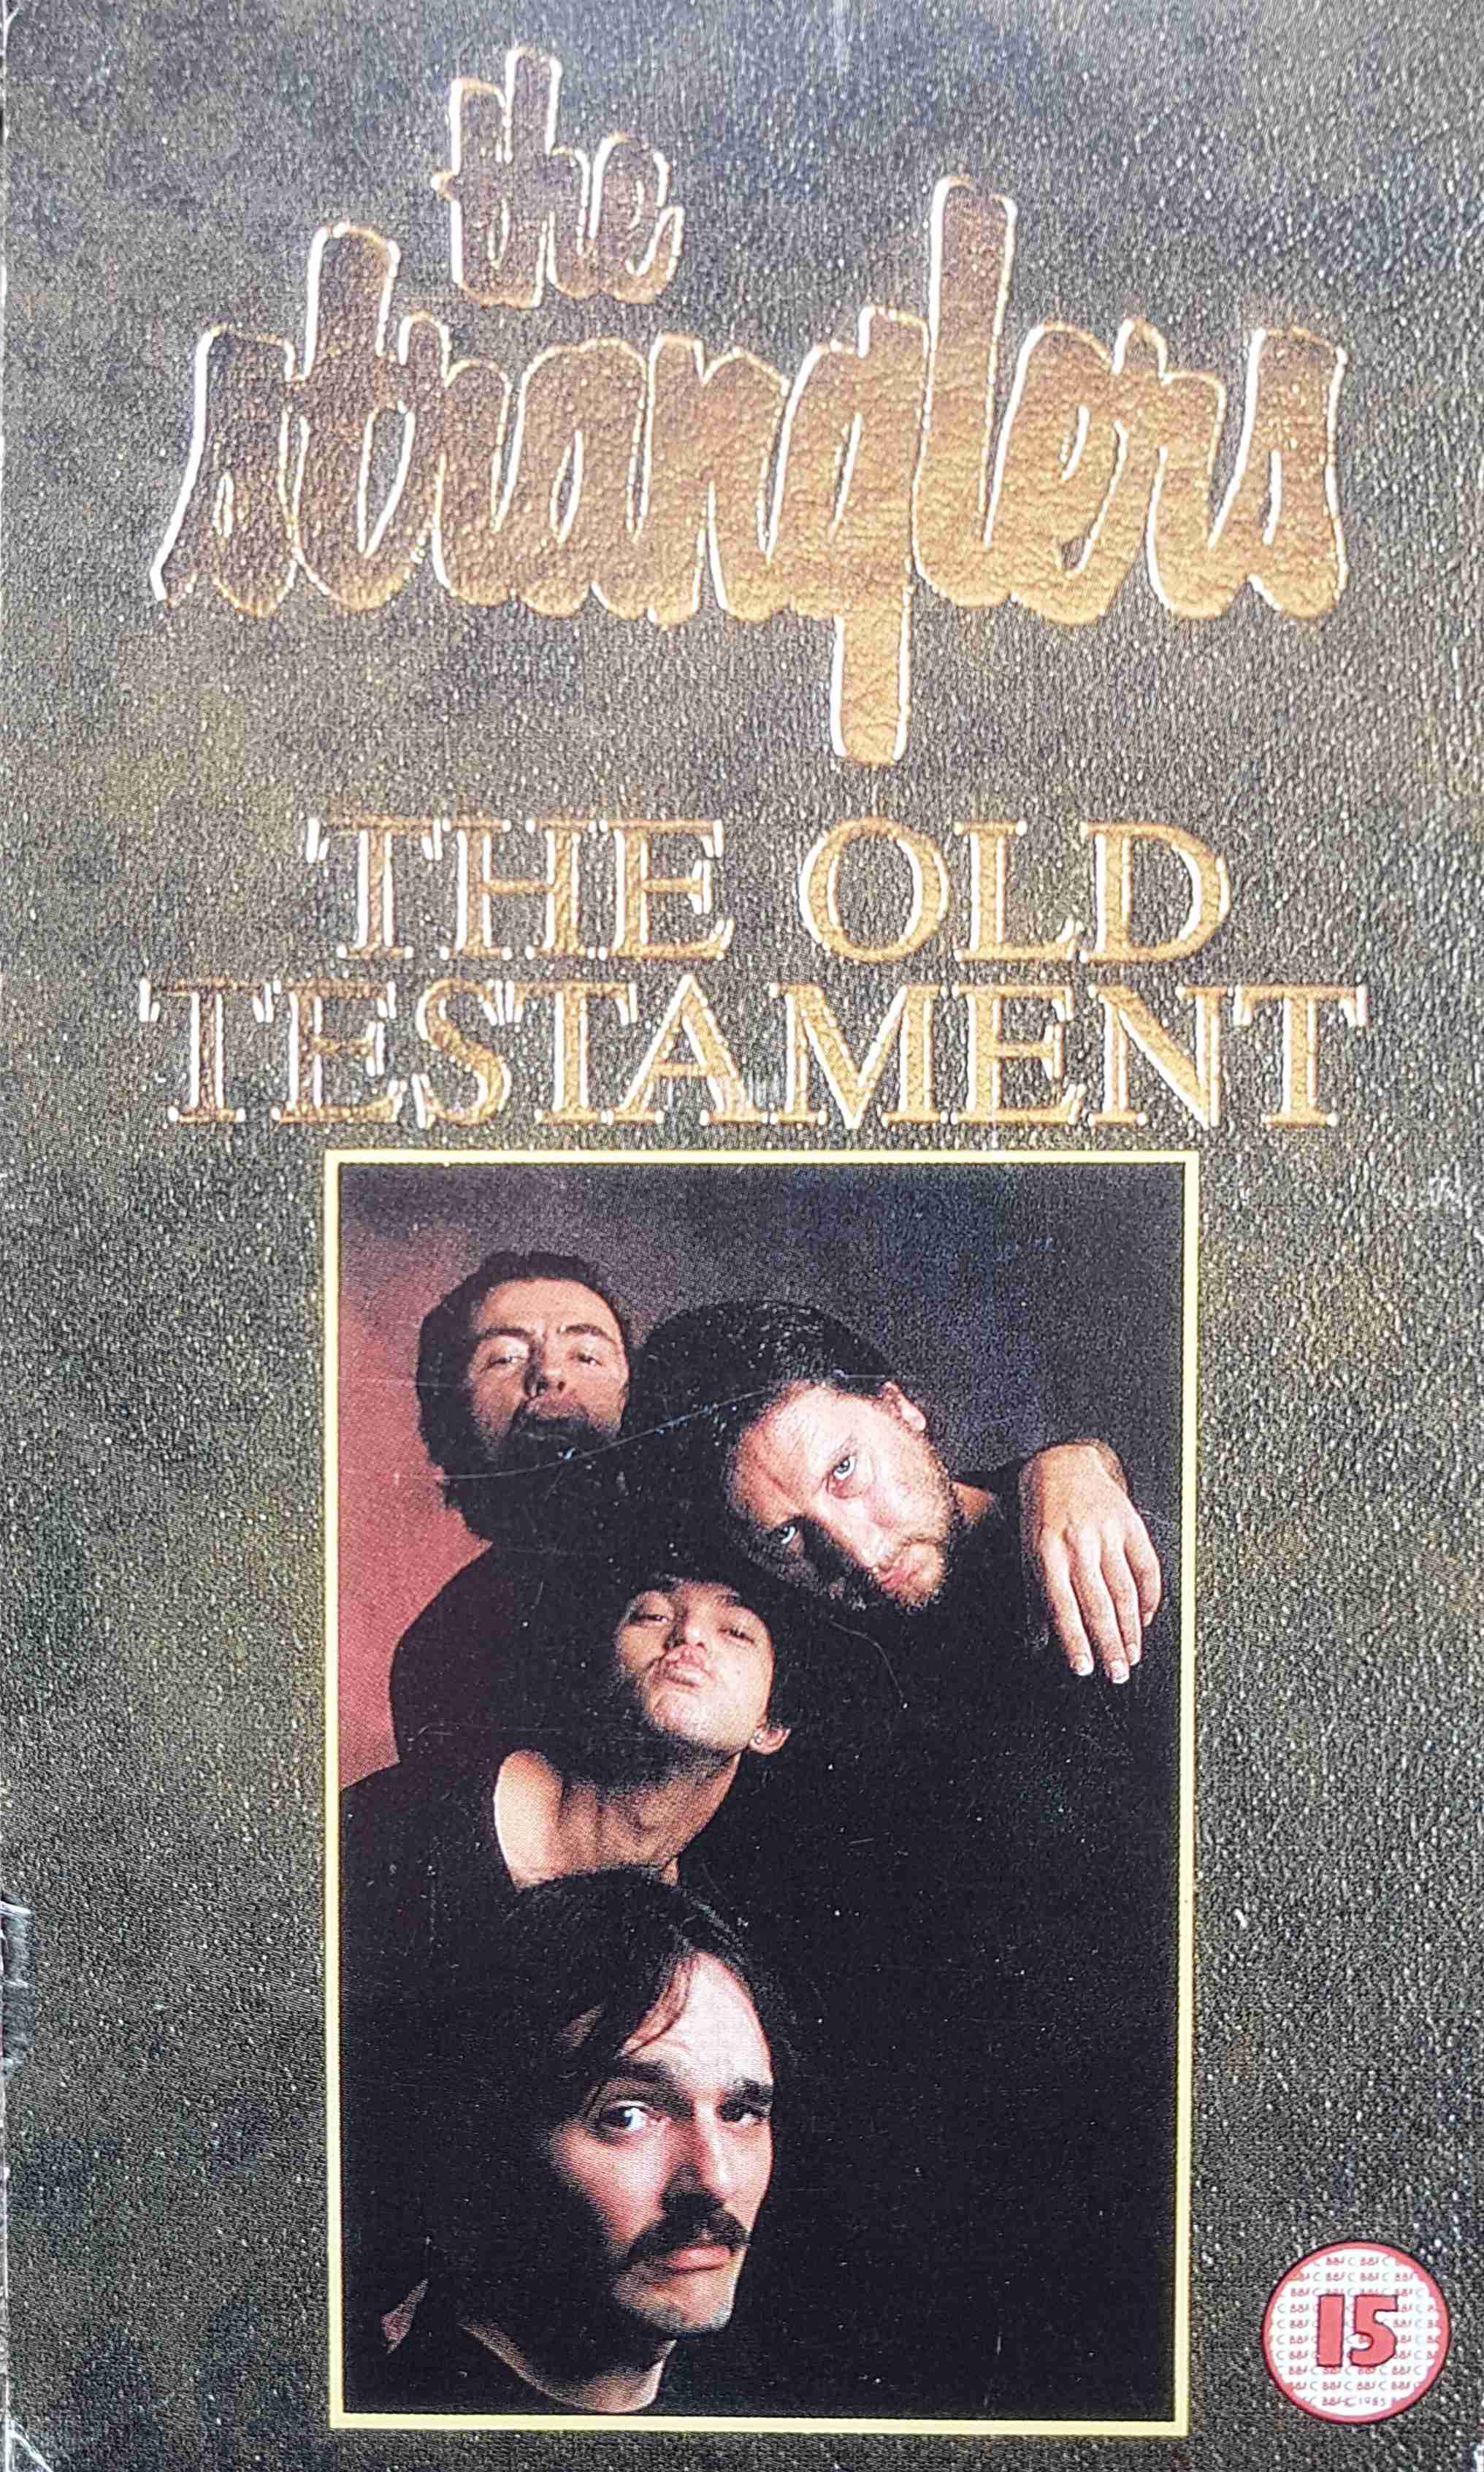 Picture of The Old Testament by artist The Stranglers  from The Stranglers postcards